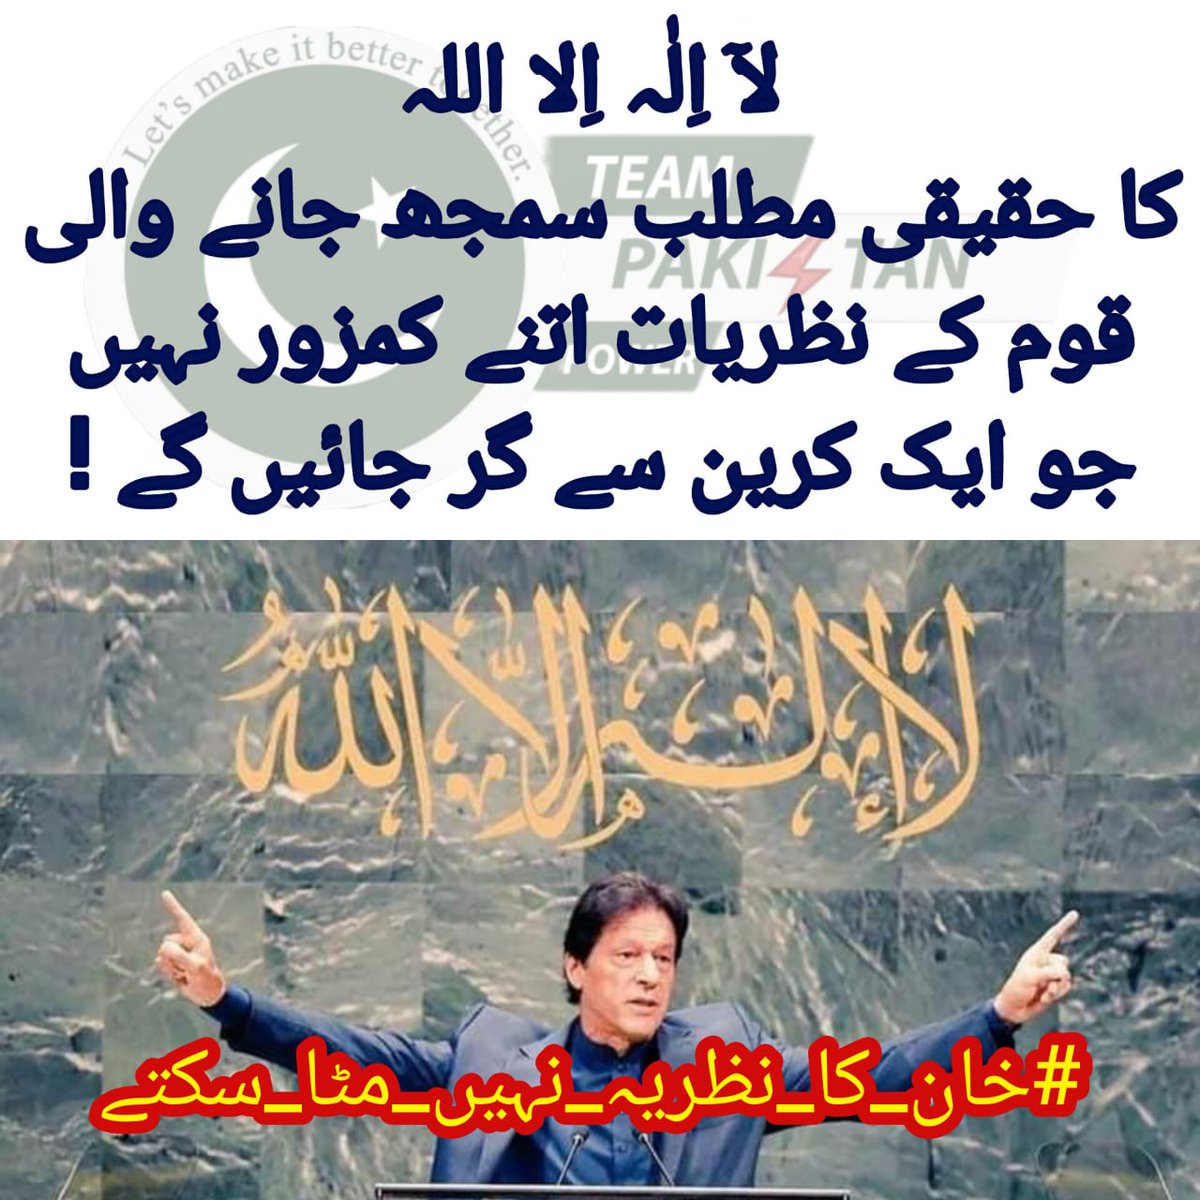 I @IamSairaAKhan stand with Imran Khan's stance. Our stance is the Haqiqi Azadi on every level, we will not obey any superpower inside or outside of Pakistan. Just Imran Khan #خان_کا_نظریہ_نہیں_مٹا_سکتے @TeamPakPower